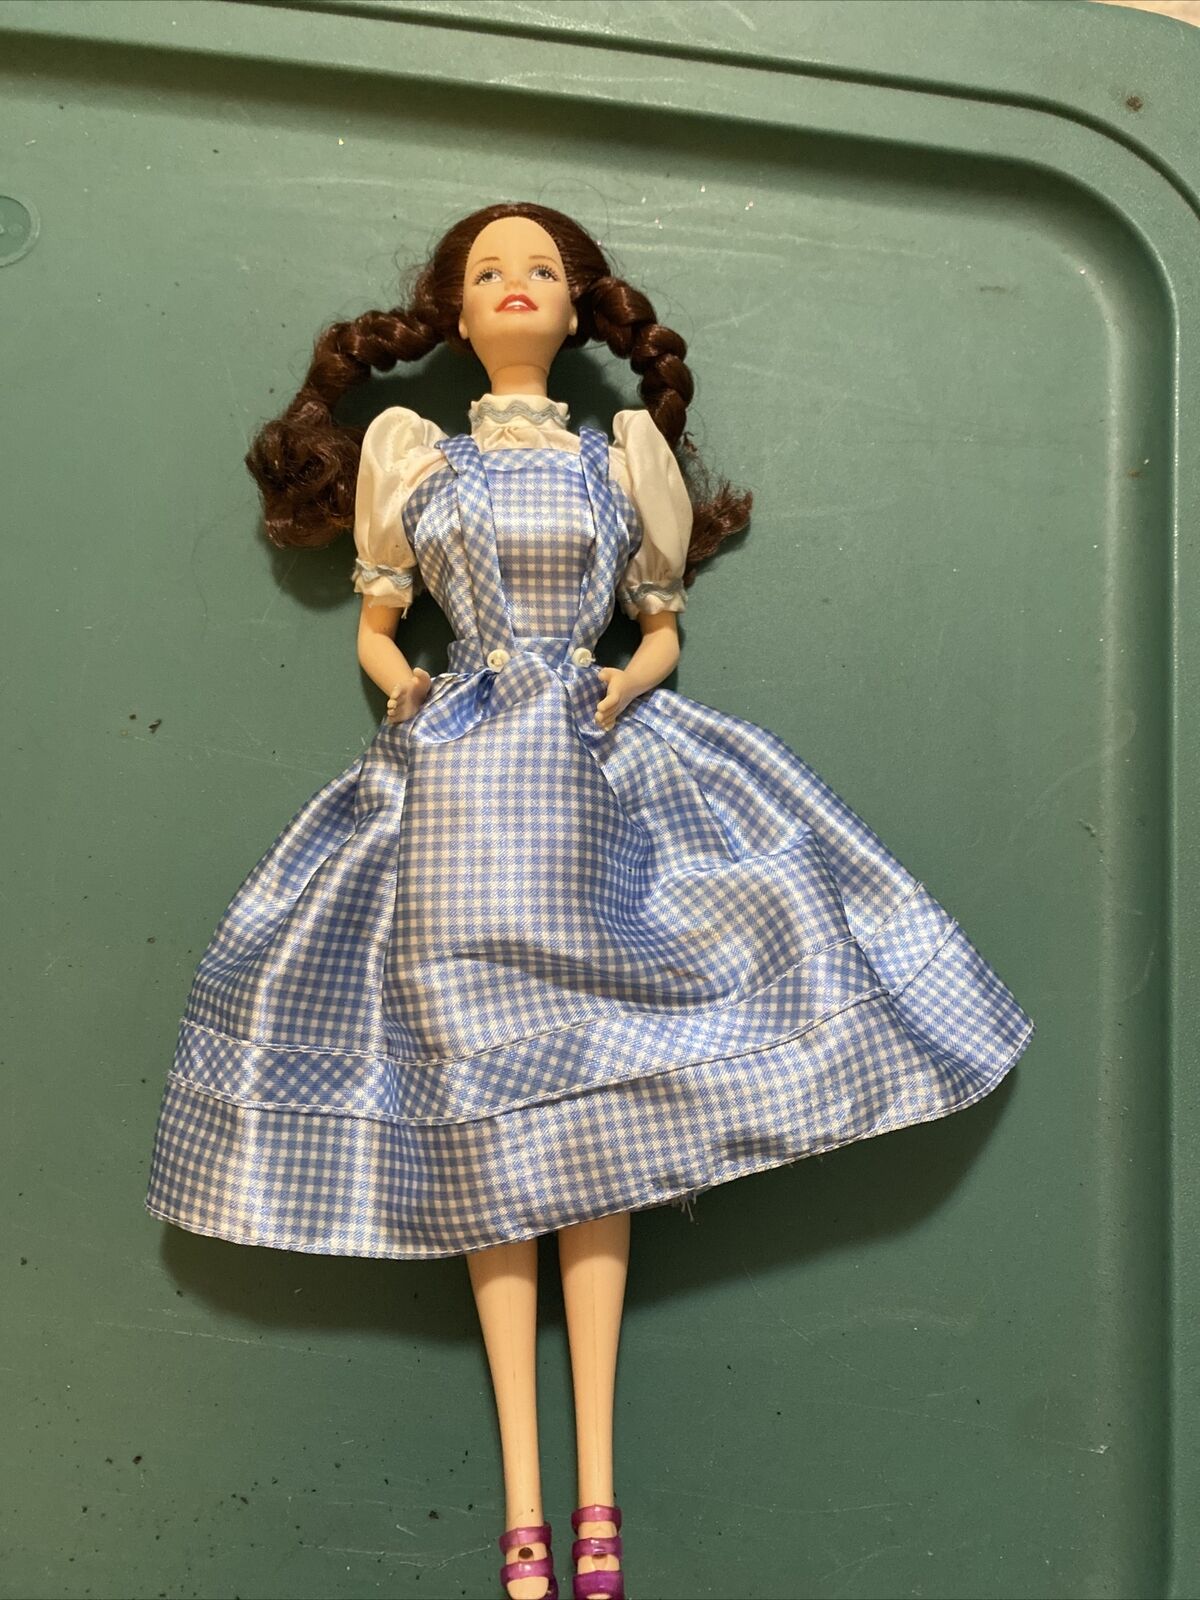 1999 Wizard Of Oz Dorothy Barbie Talks "there's No Place Like Home"